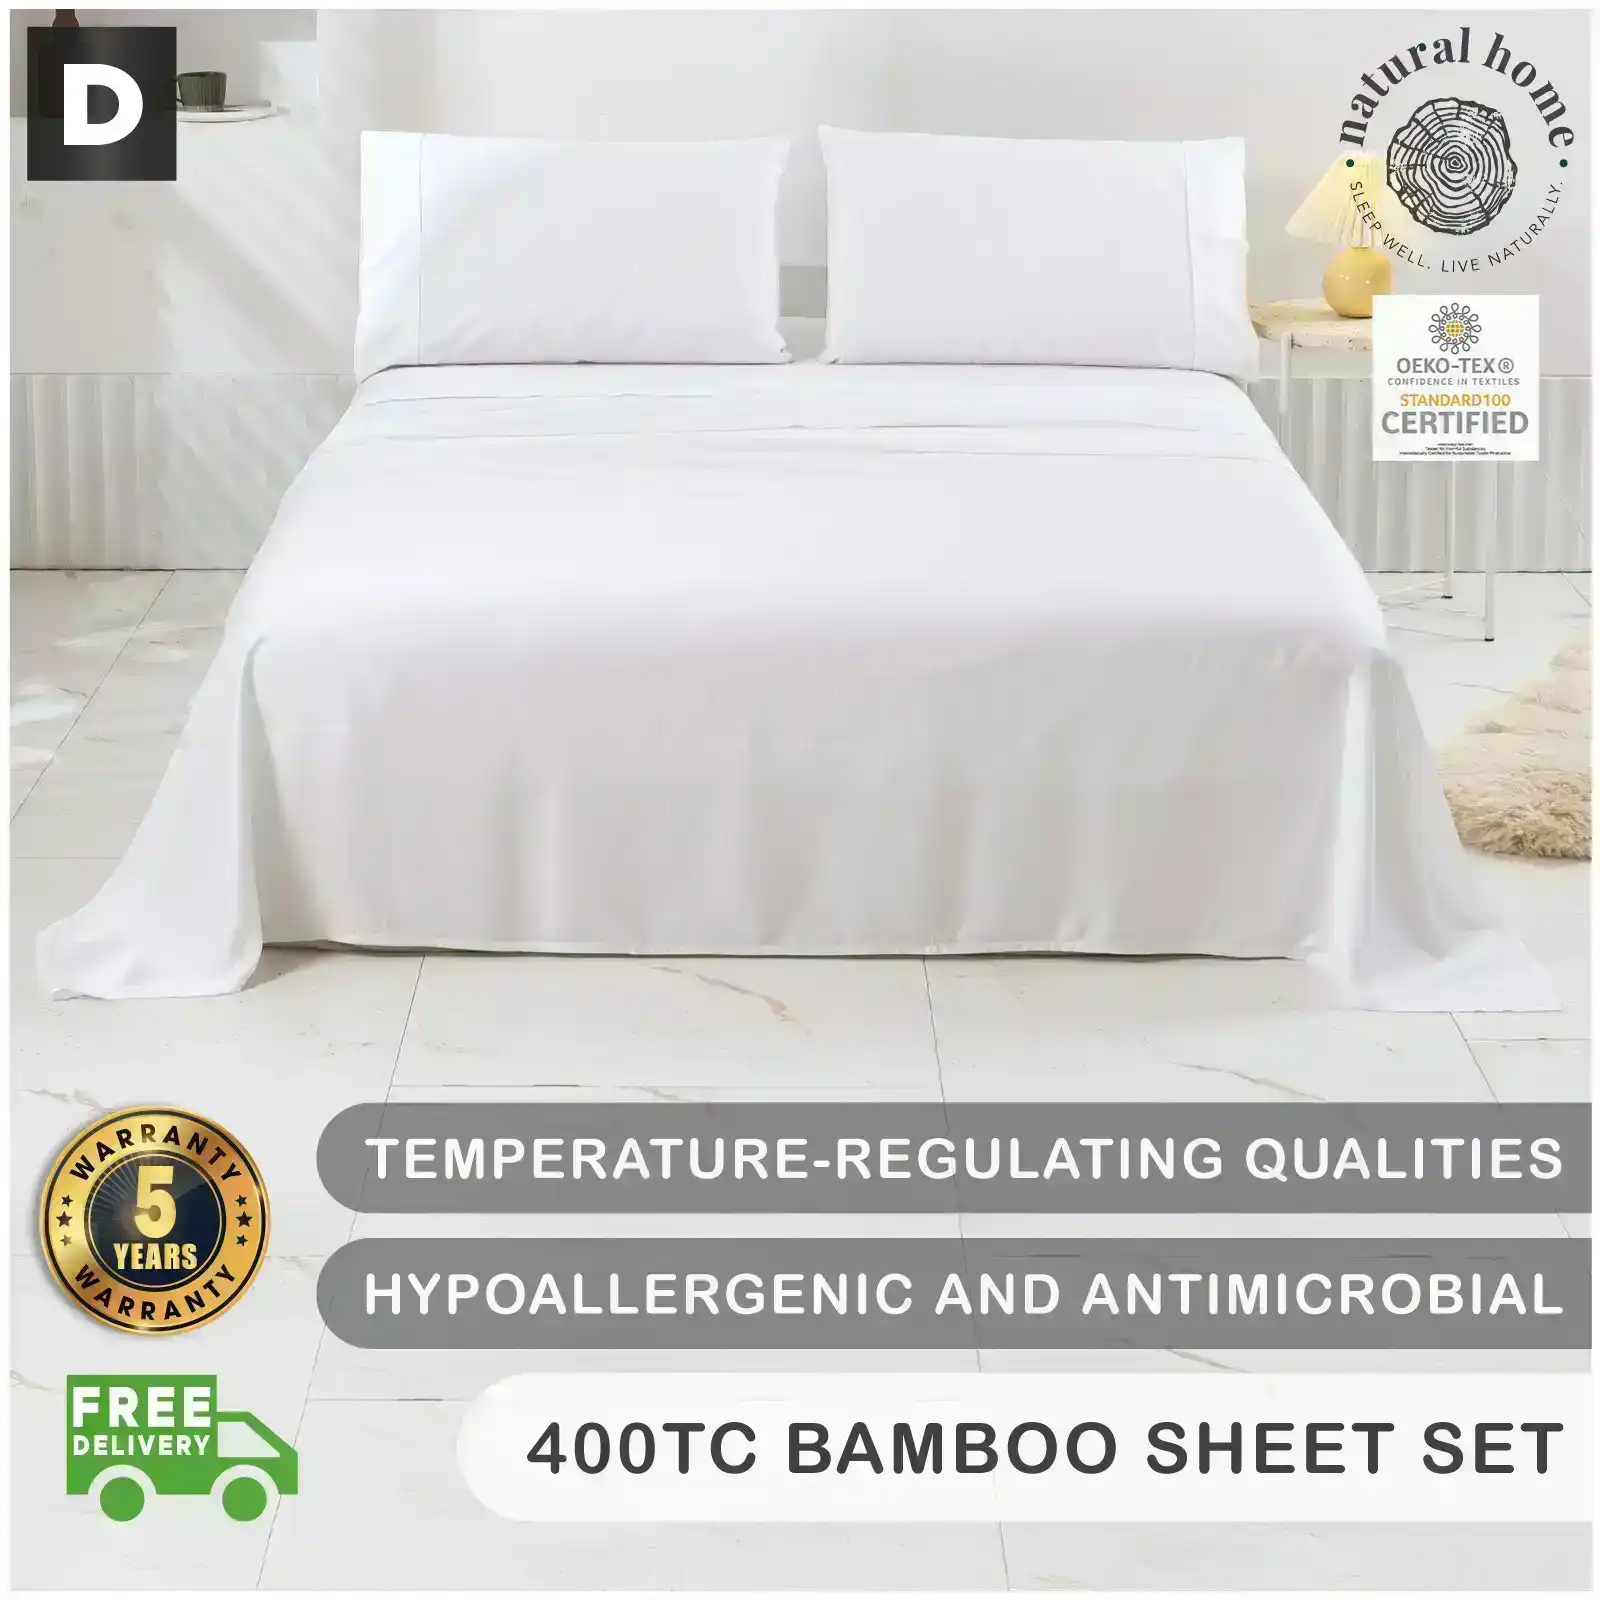 Natural Home Bamboo Sheet Set White Double Bed